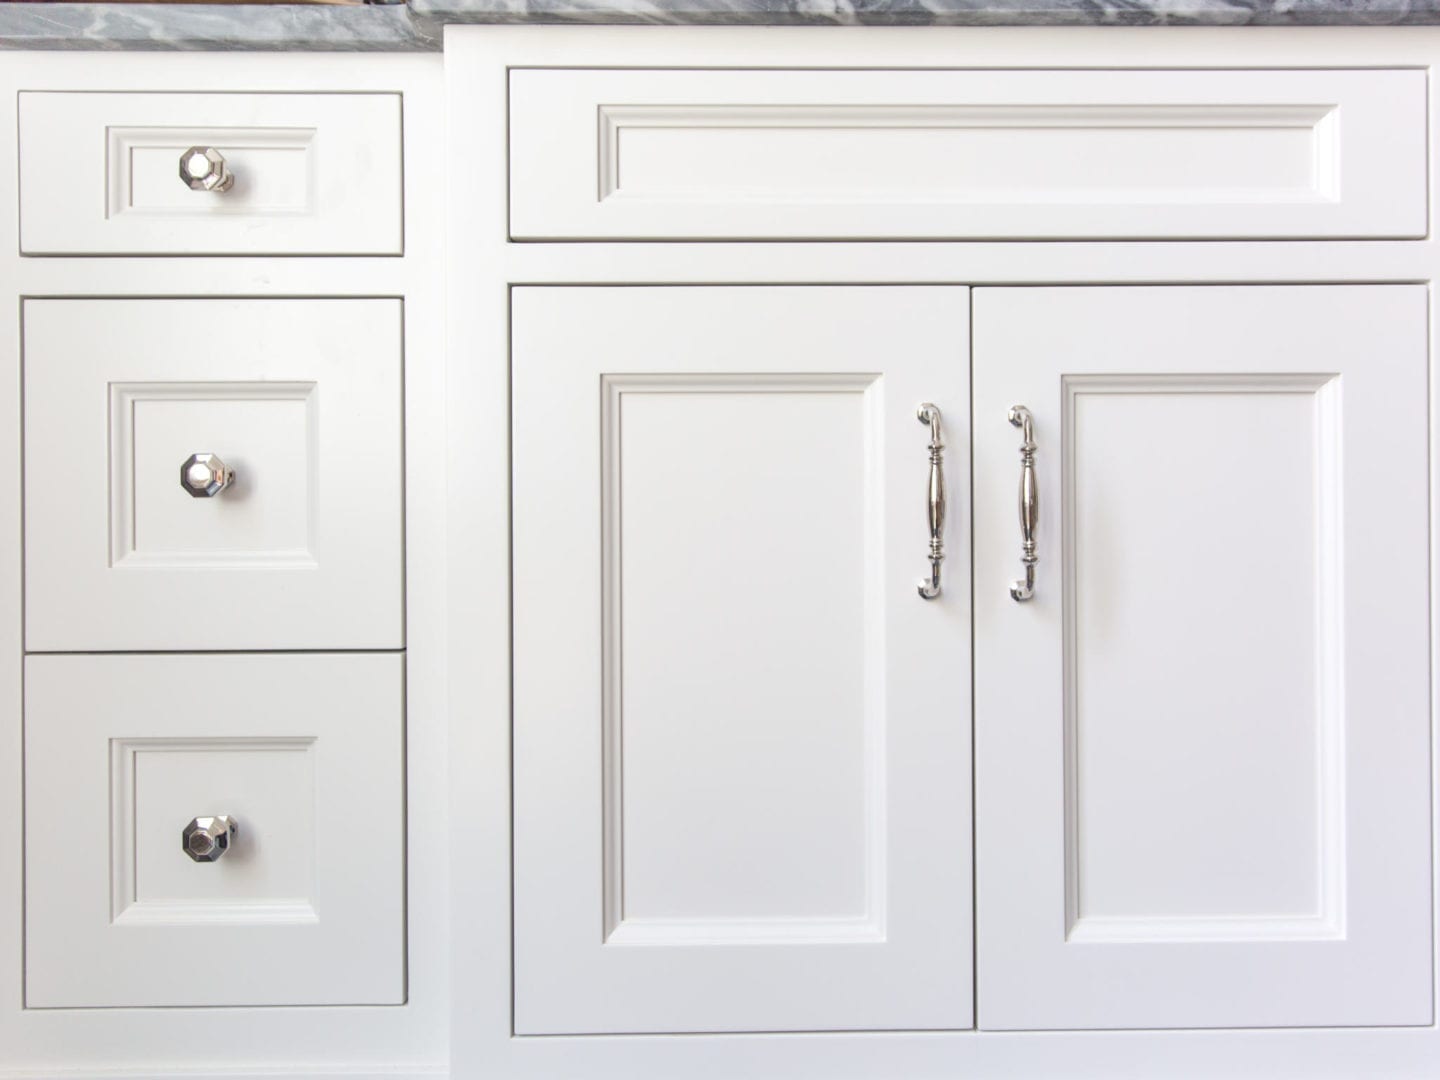 How to choose bathroom hardware. Mixing pulls and knobs on cabinets.